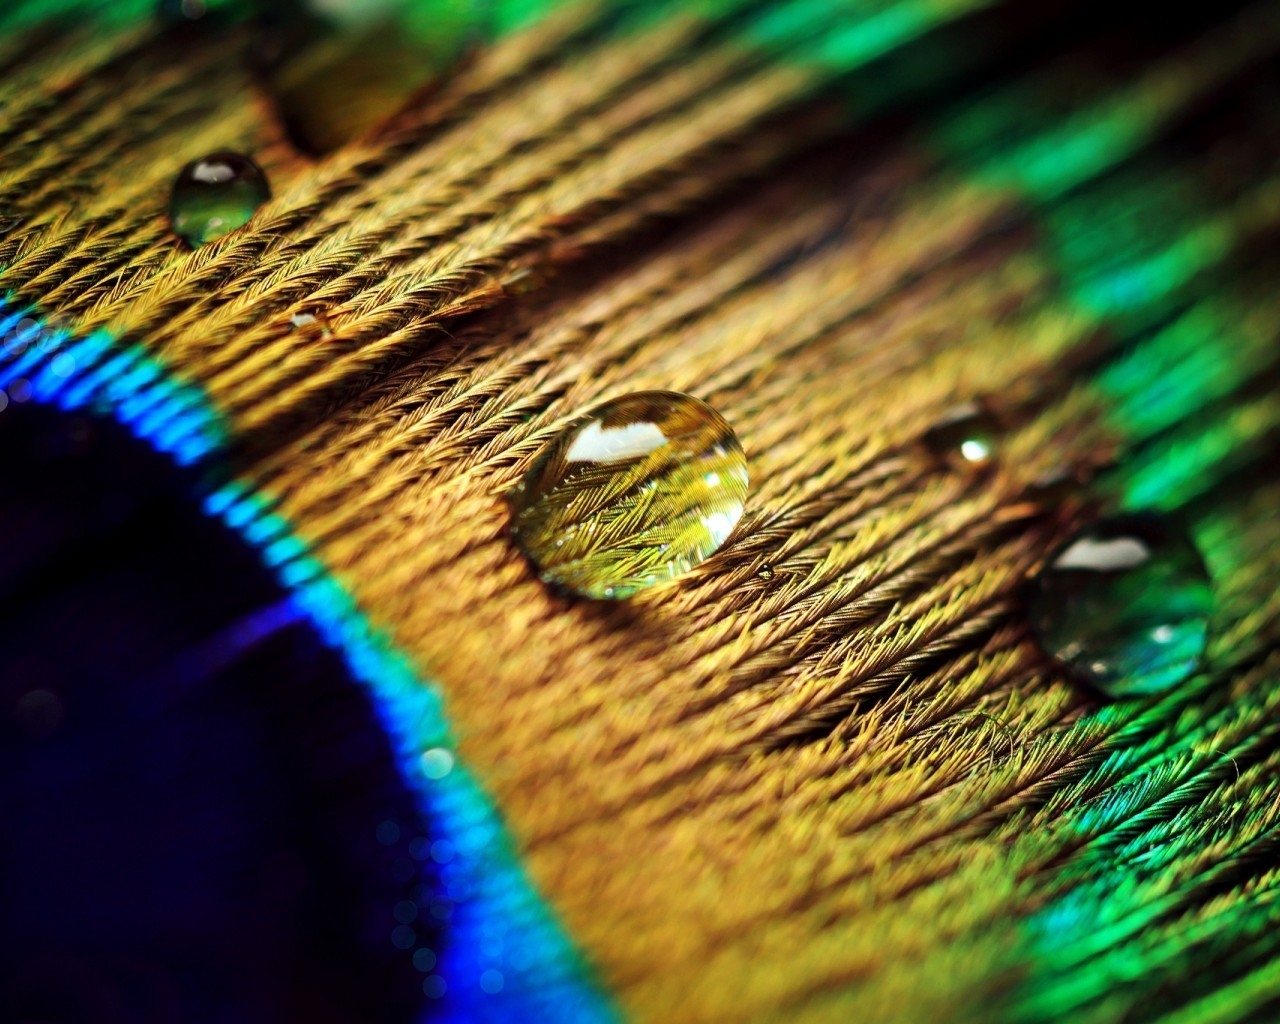 Peacock Feather Drops for 1280 x 1024 resolution